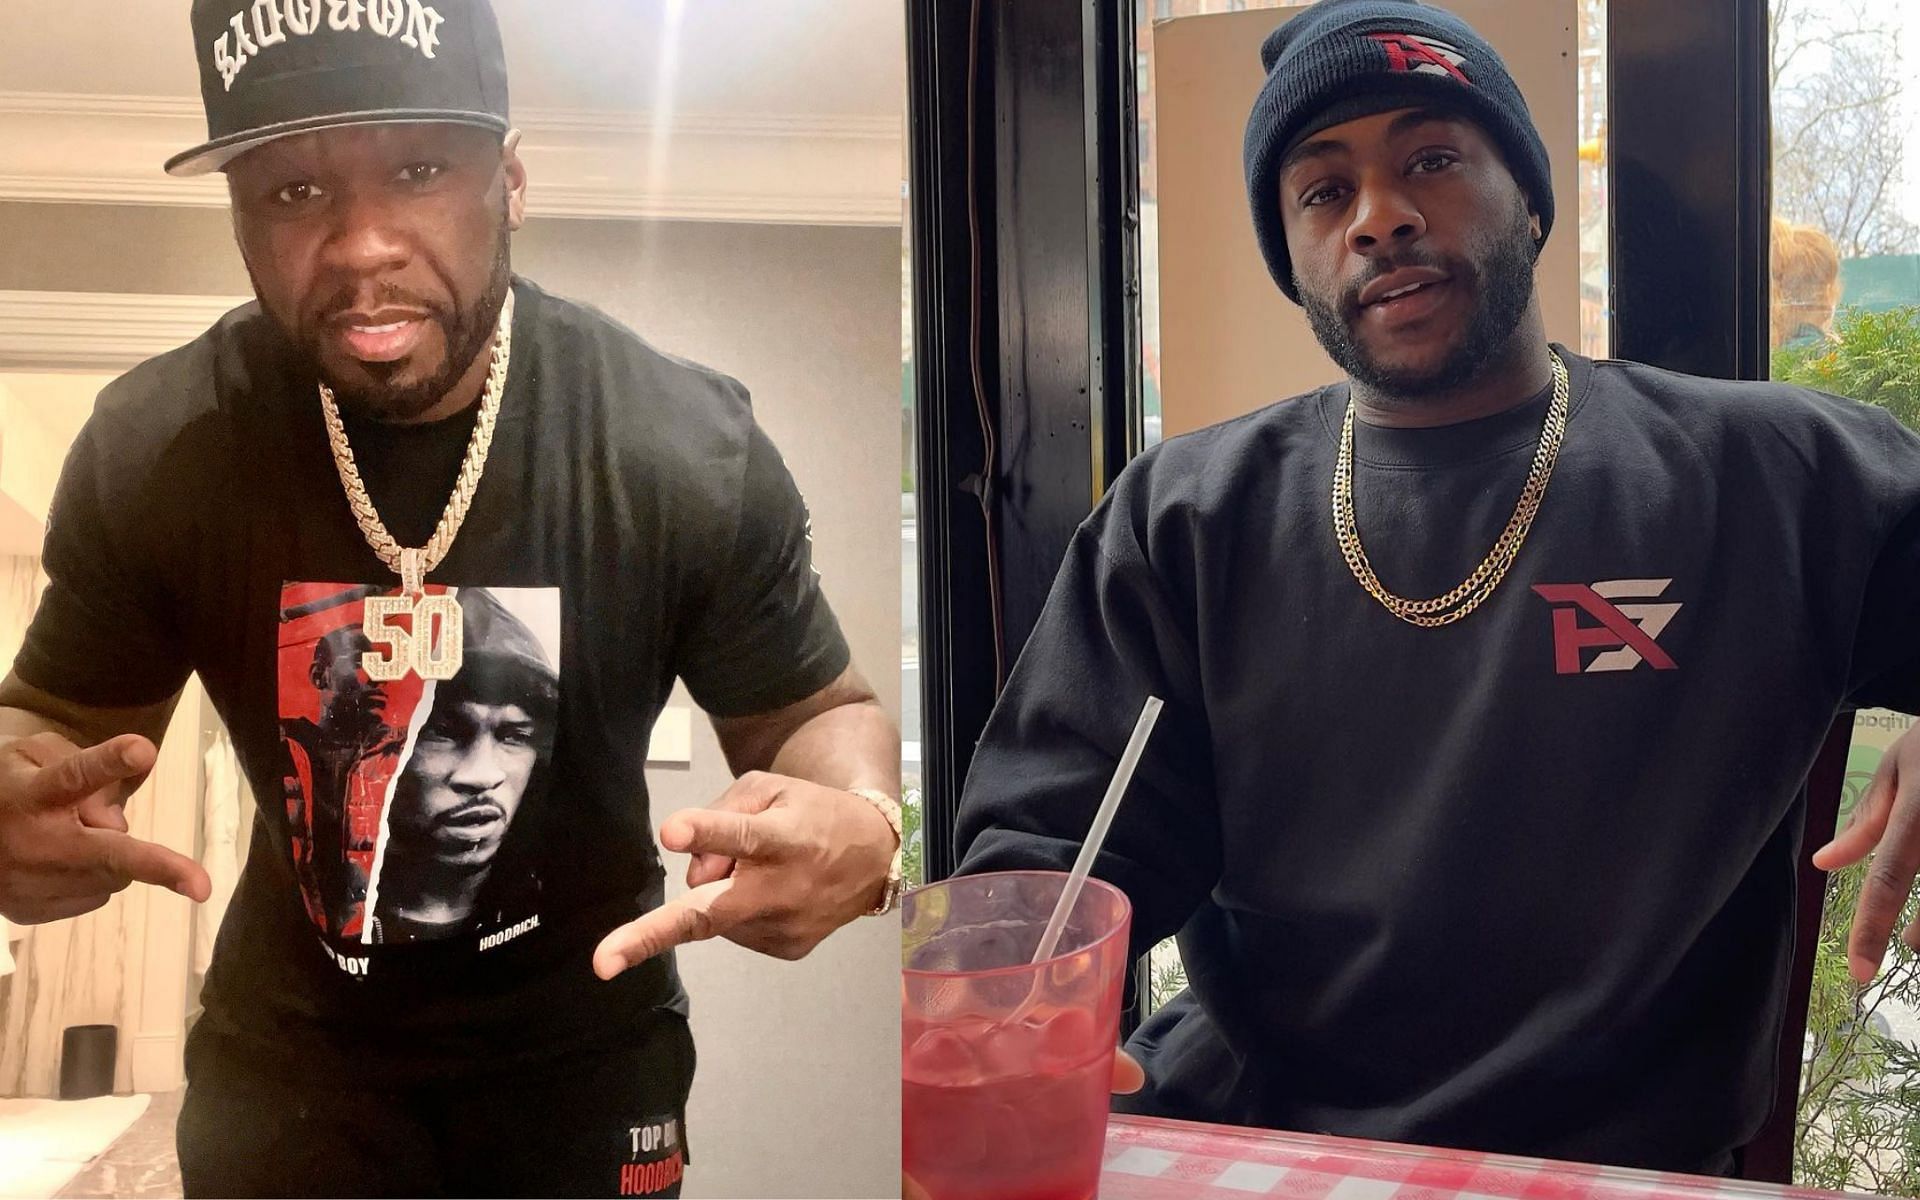 50 Cent (left) and Aljamain Sterling [Image Courtesy: @50cent and @funkmastermma on Instagram]